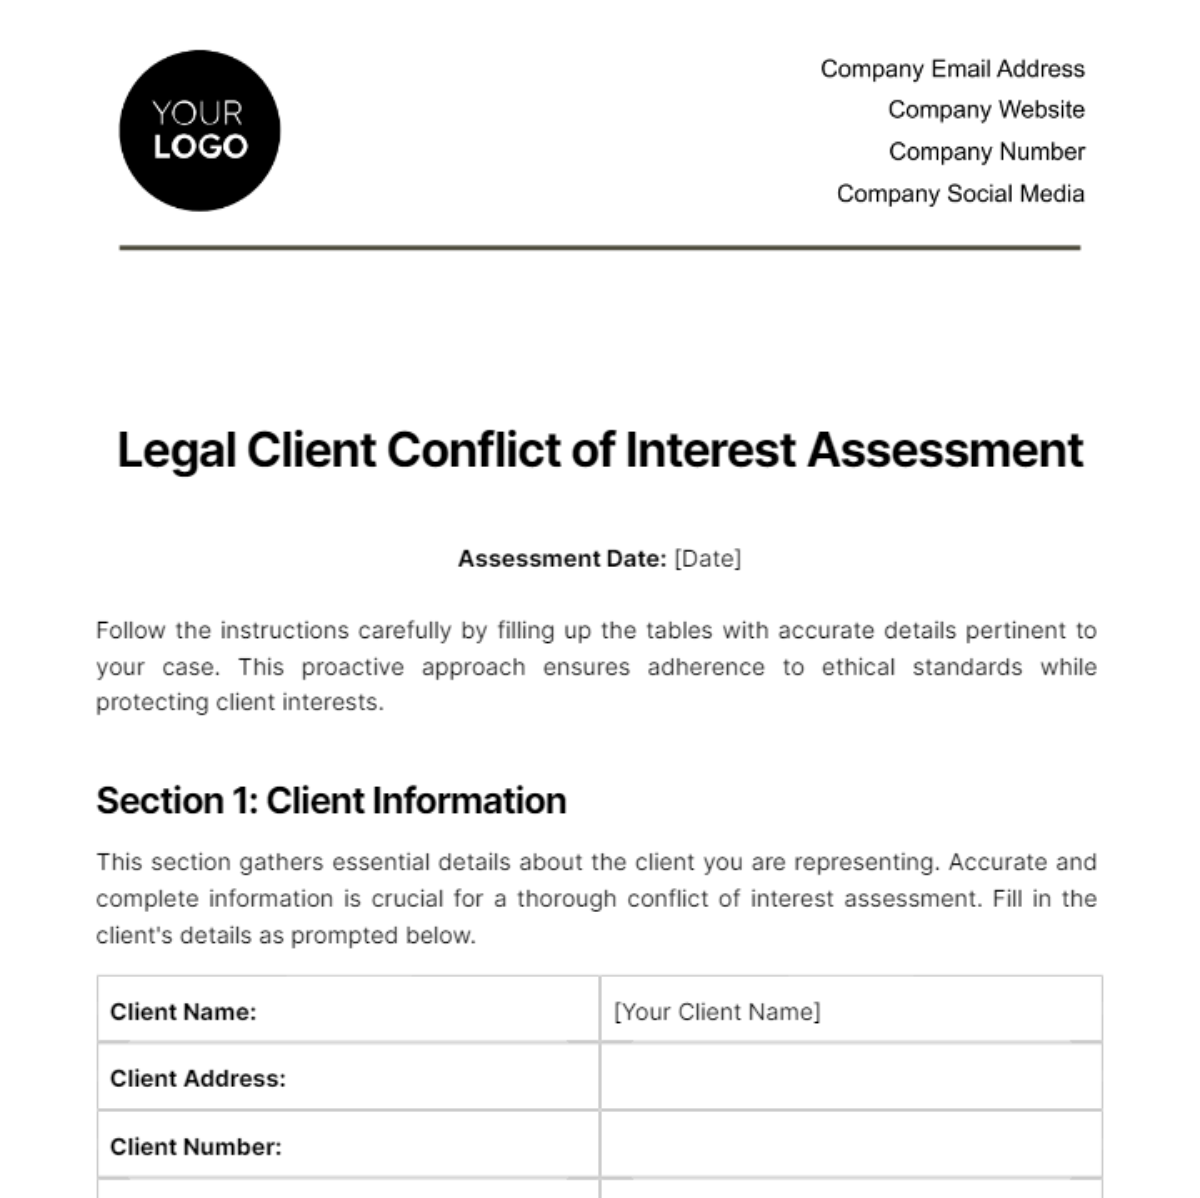 Free Legal Client Conflict of Interest Assessment Template